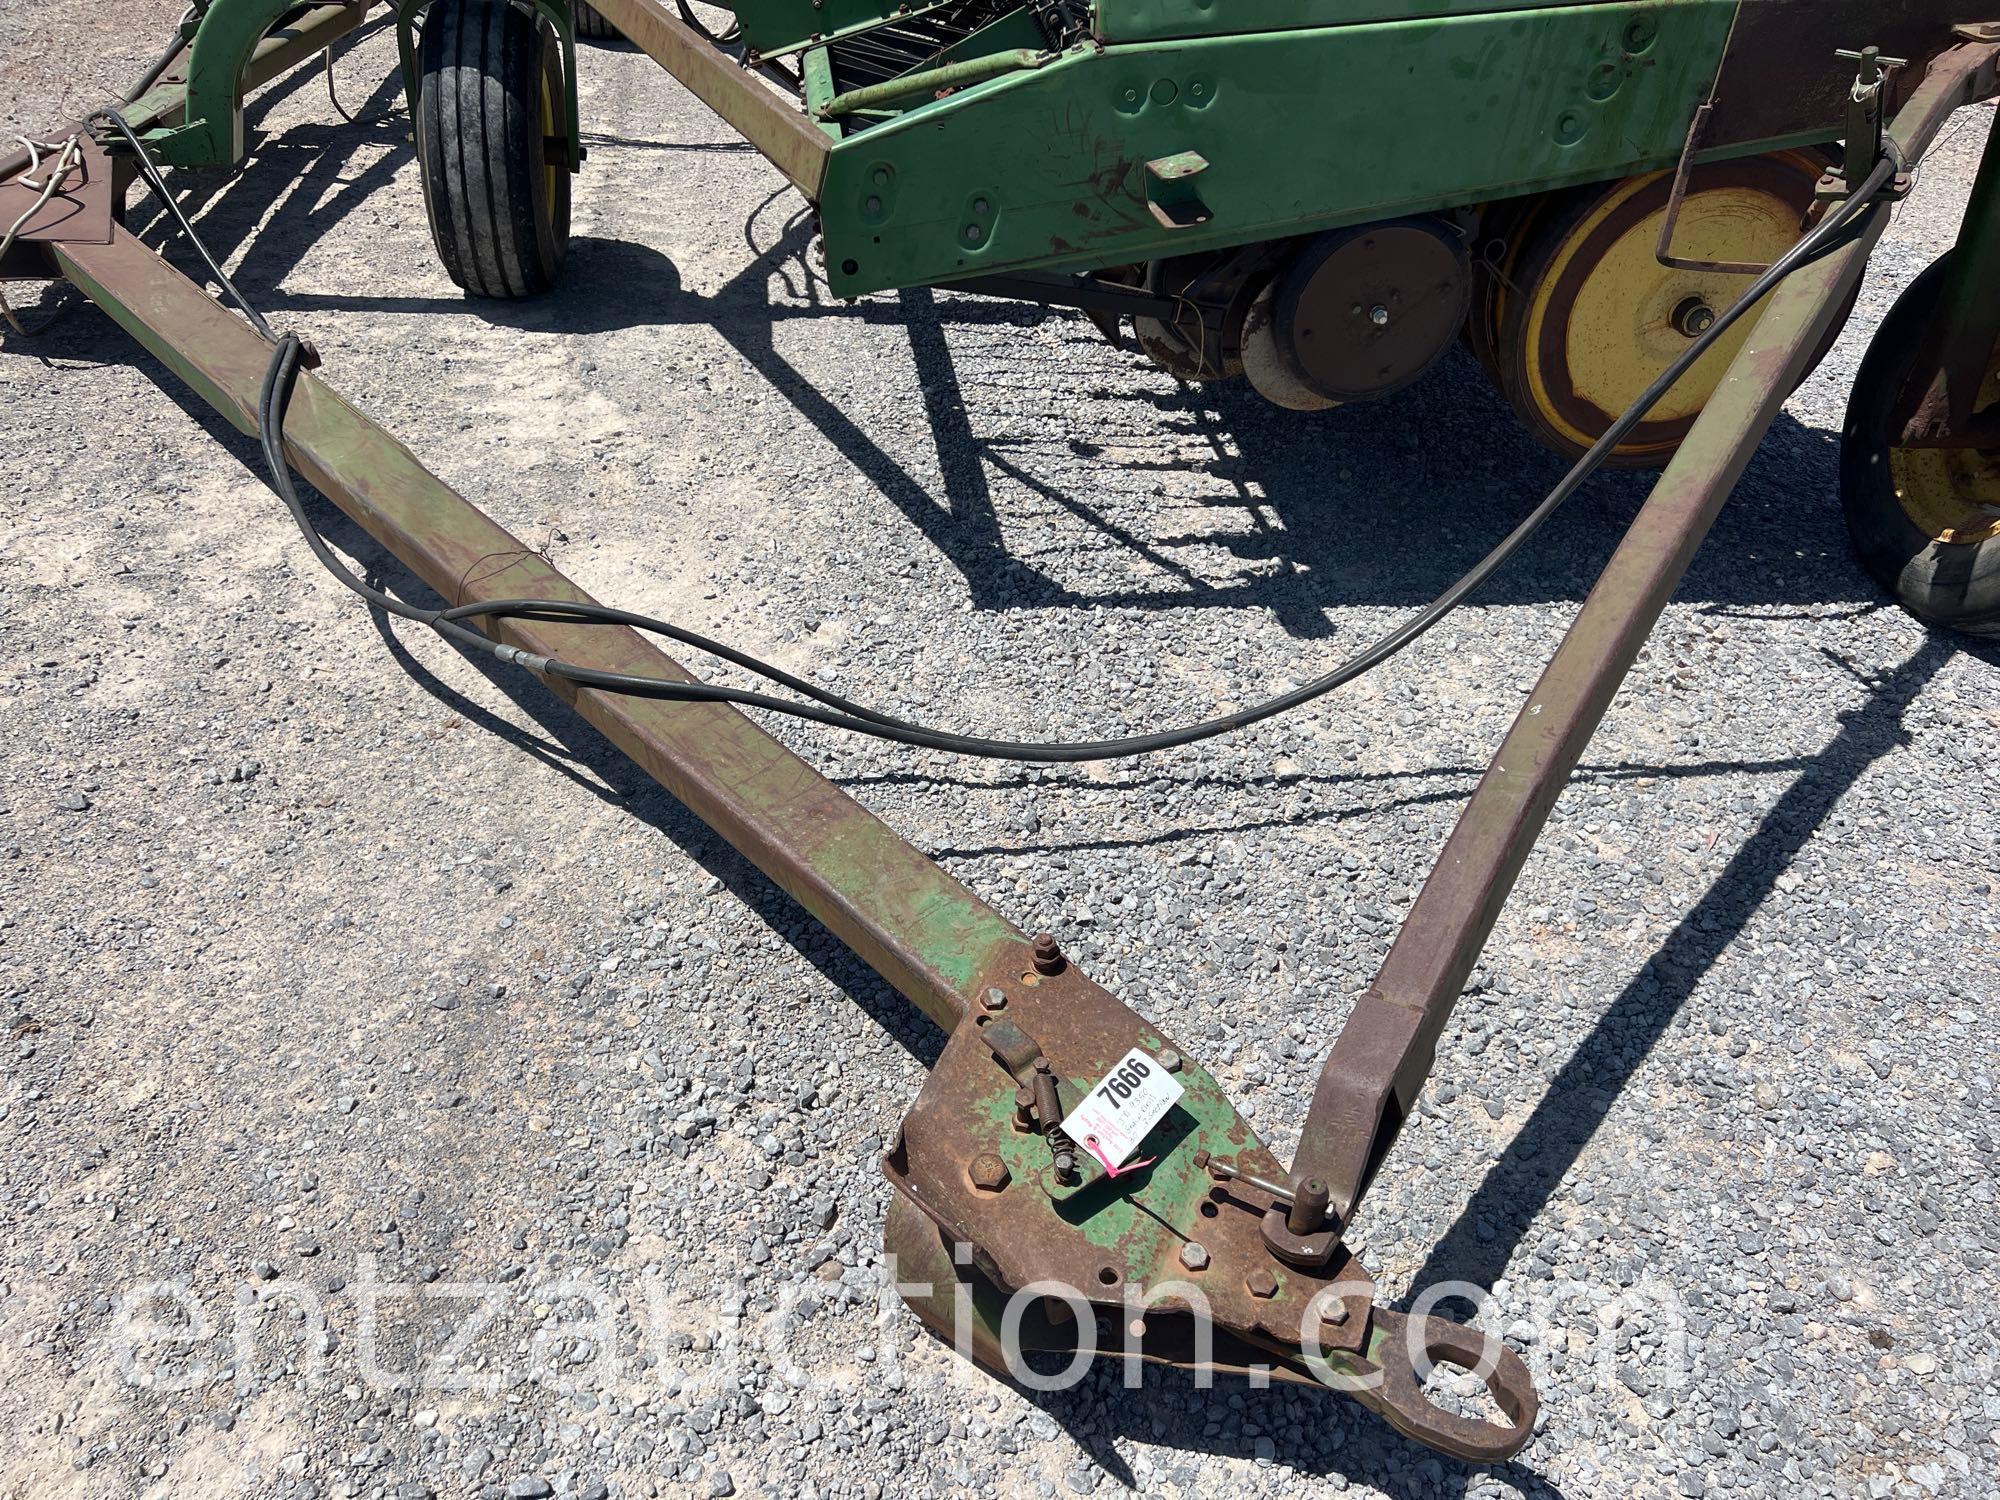 JD 9350 GRAIN DRILL, 30', 3 SECTION, 7" SPACING,